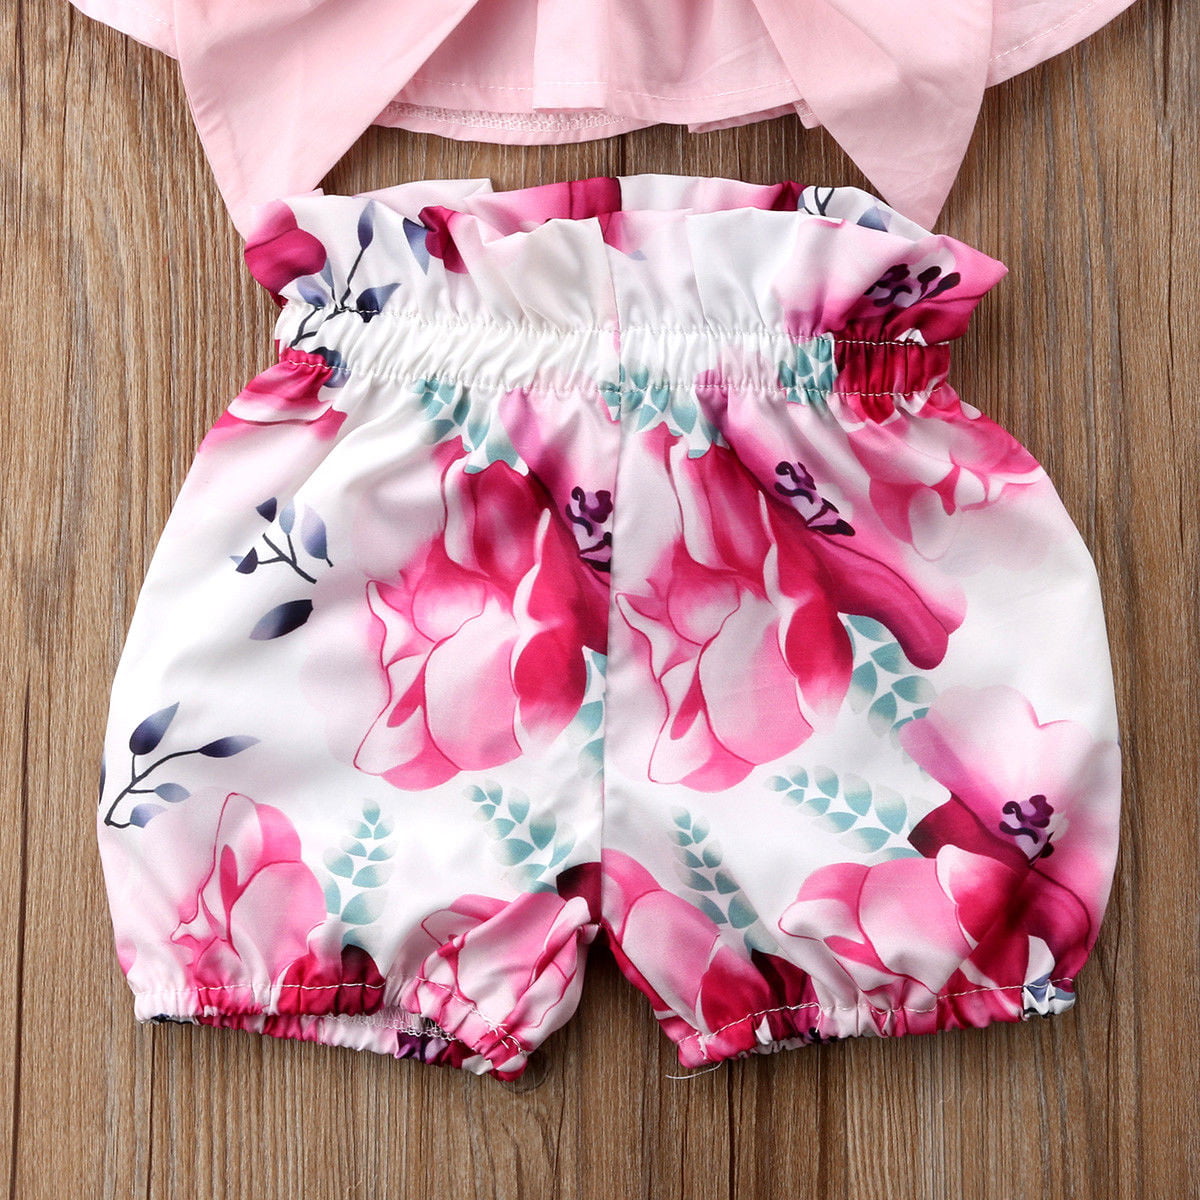 Outfits Set Infant Baby Girls Sleeveless Backless Halter Bowknot Top Floral Shorts Bloomers Summer Clothes 